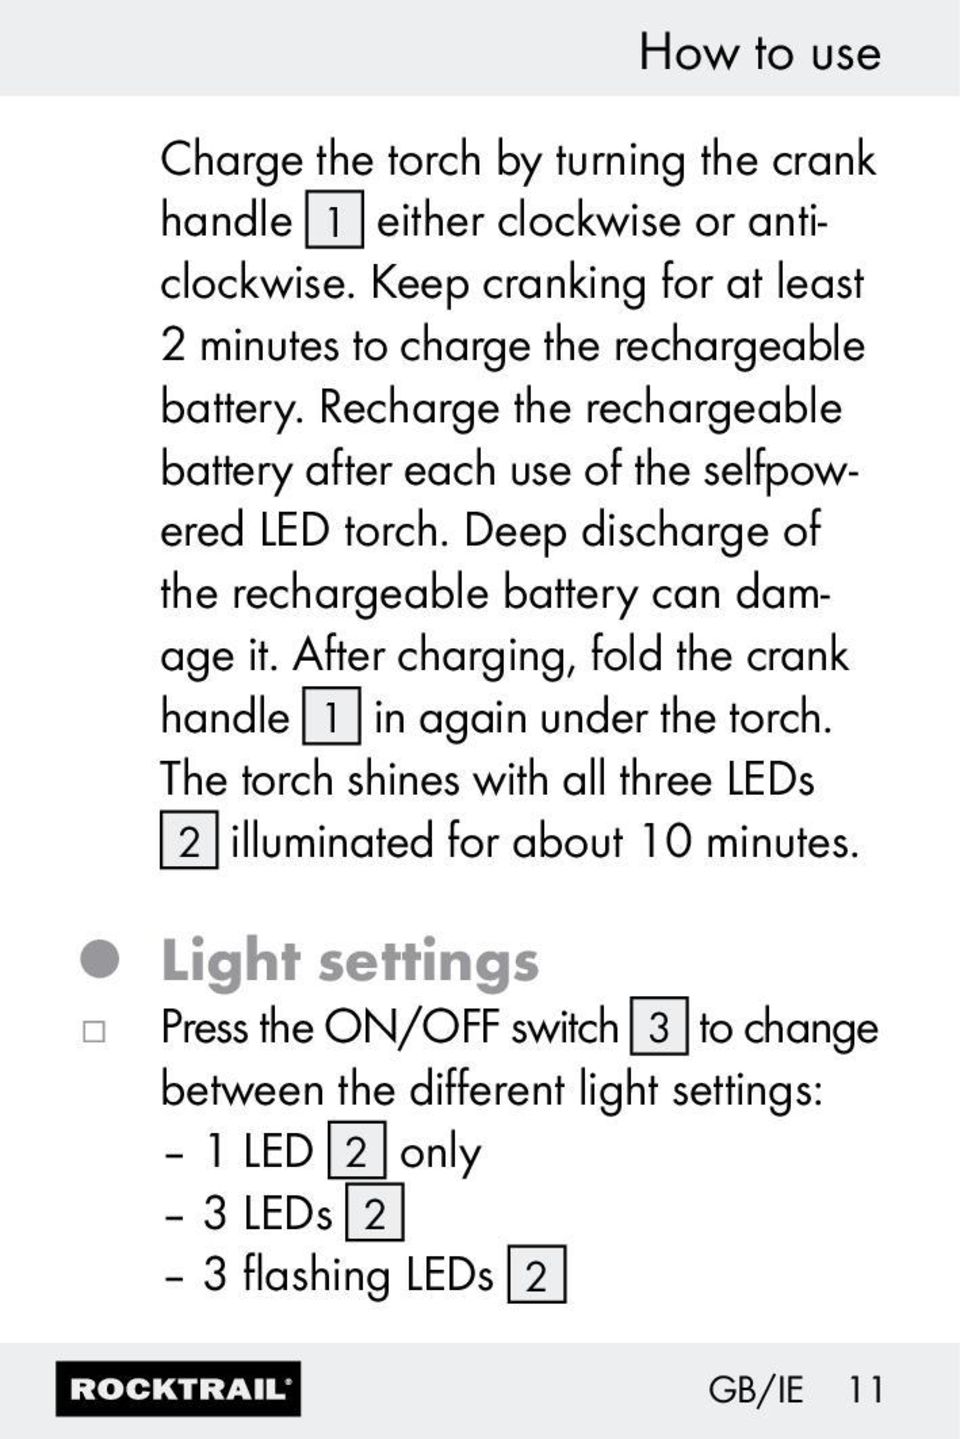 Recharge the rechargeable battery after each use of the selfpowered LED torch. Deep discharge of the rechargeable battery can damage it.